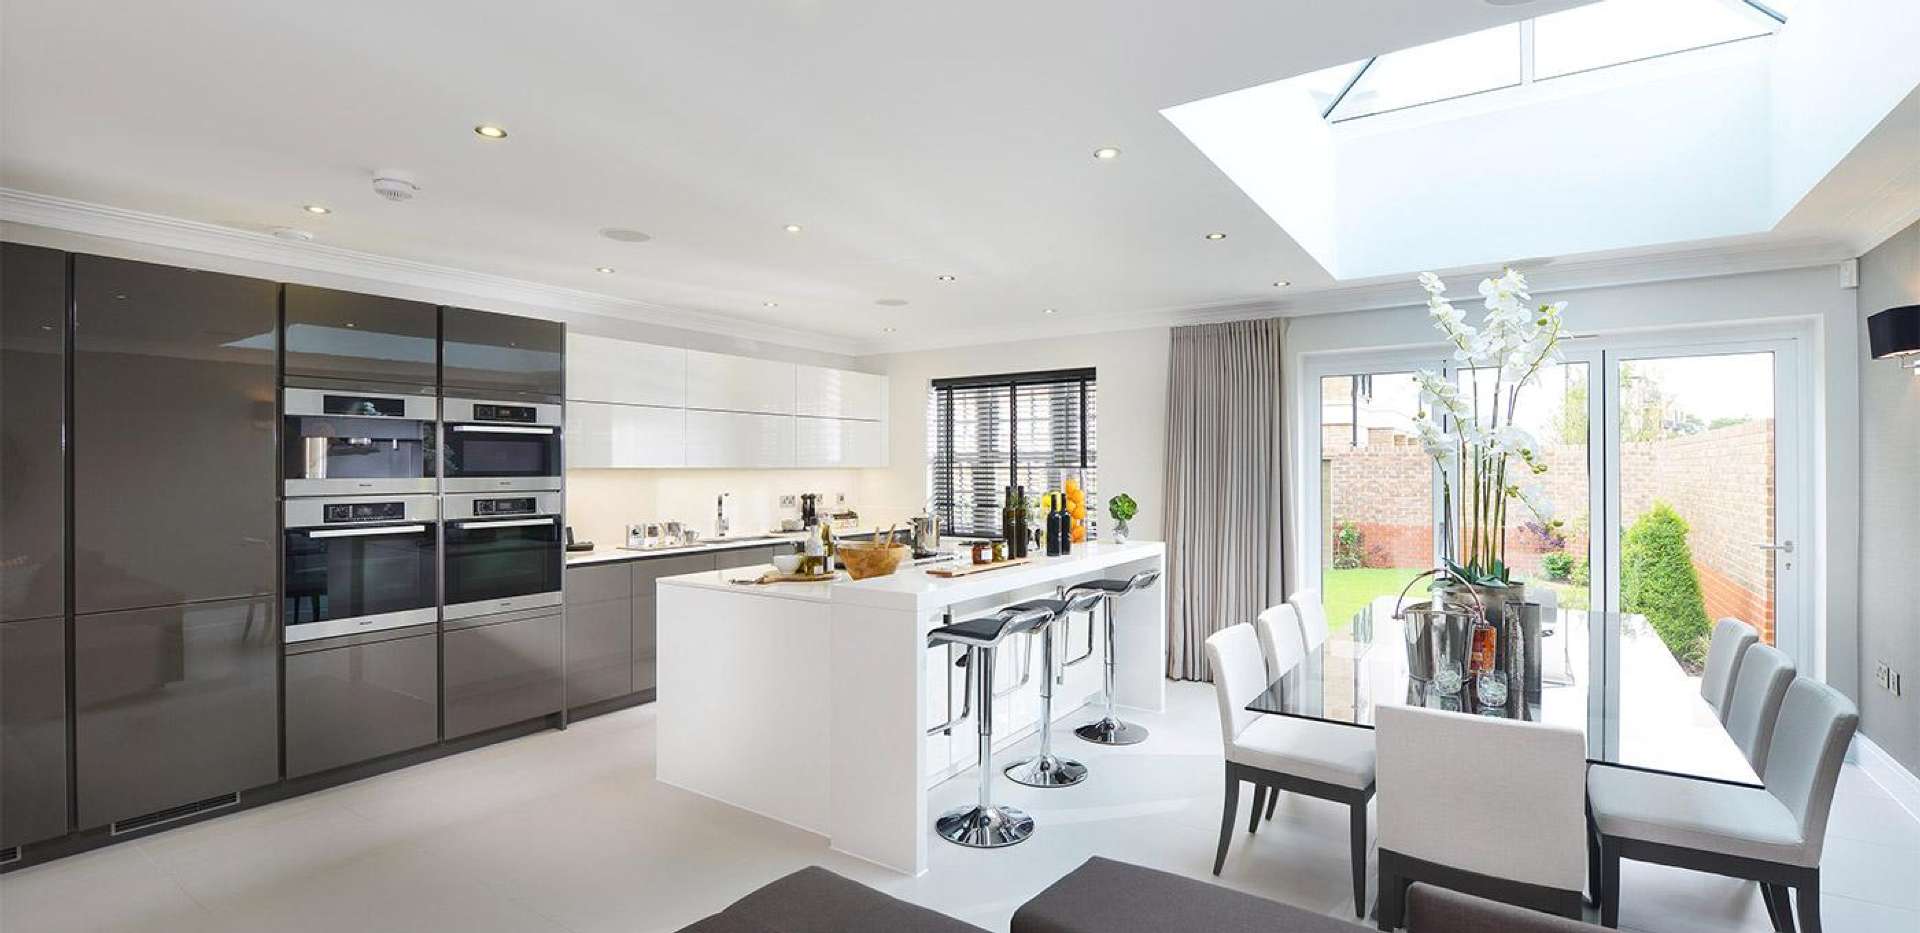 St James, Queen Mary's Place, Show Home, Kitchen, Dining Area, Interior